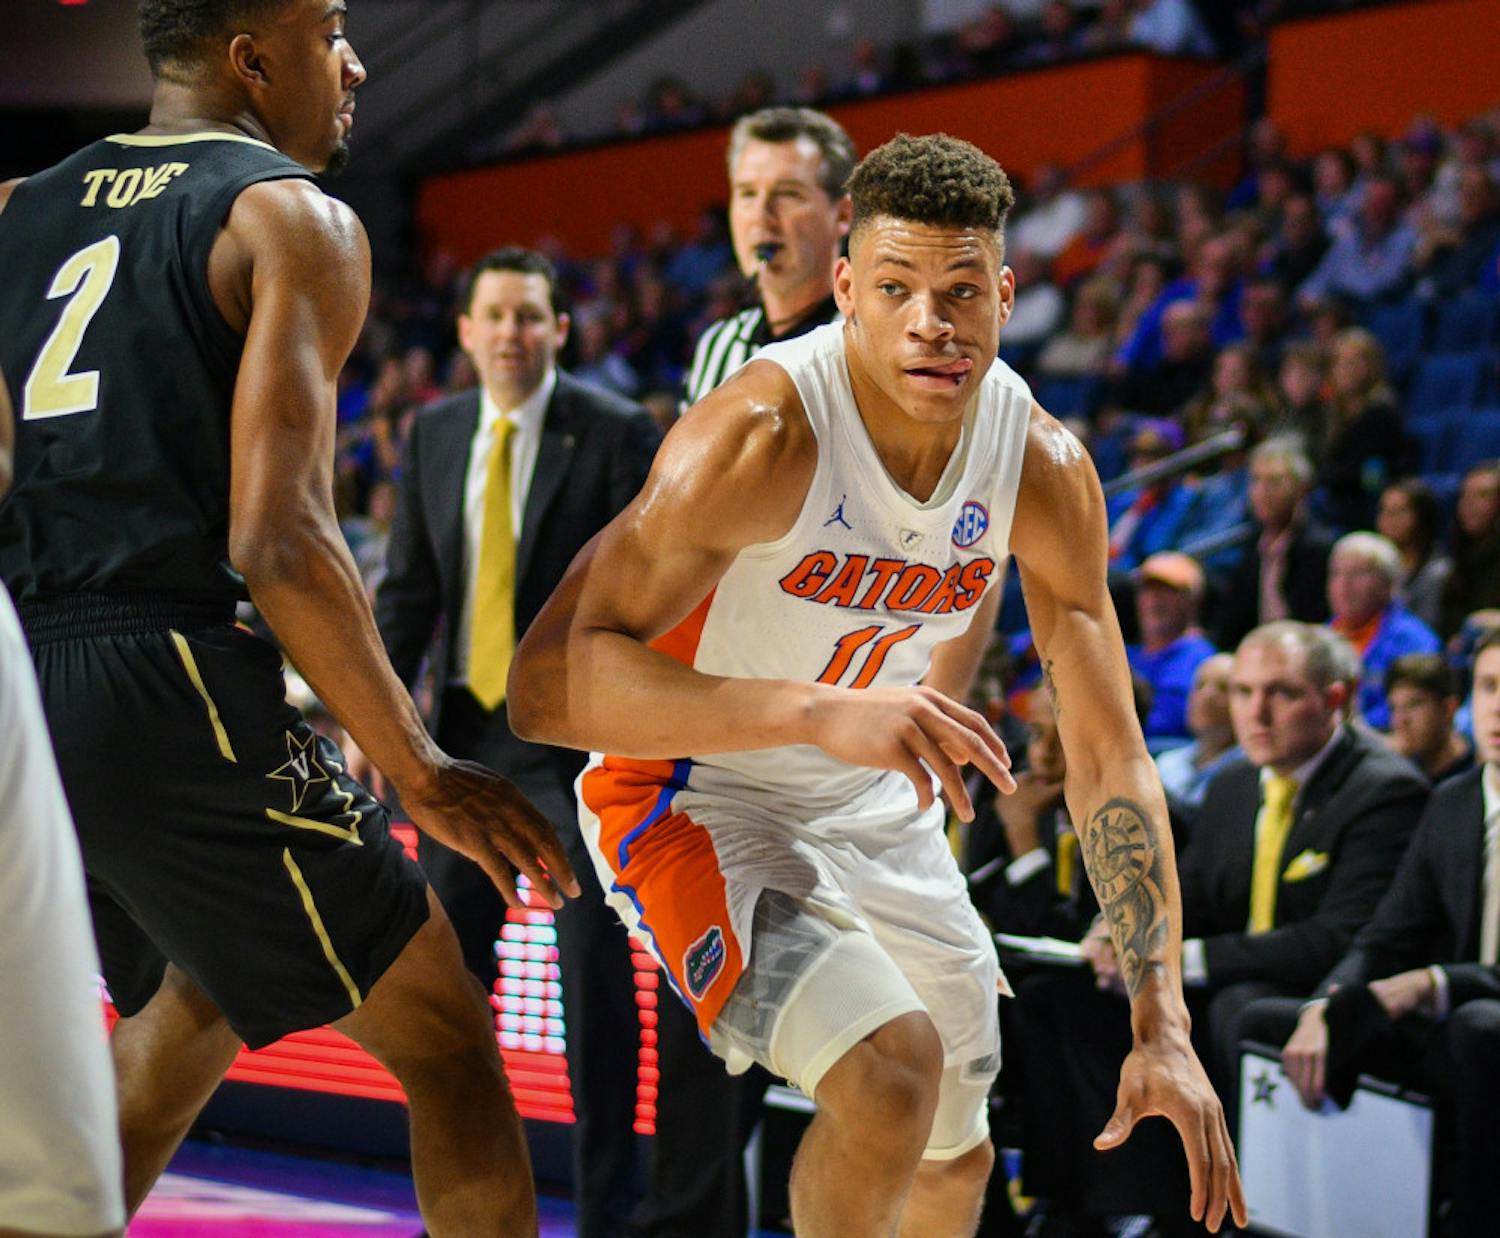 Freshman Keyontae Johnson scored a team-high 15 points and collected nine rebounds in the Gators' 66-57 win over Vanderbilt Wednesday night.